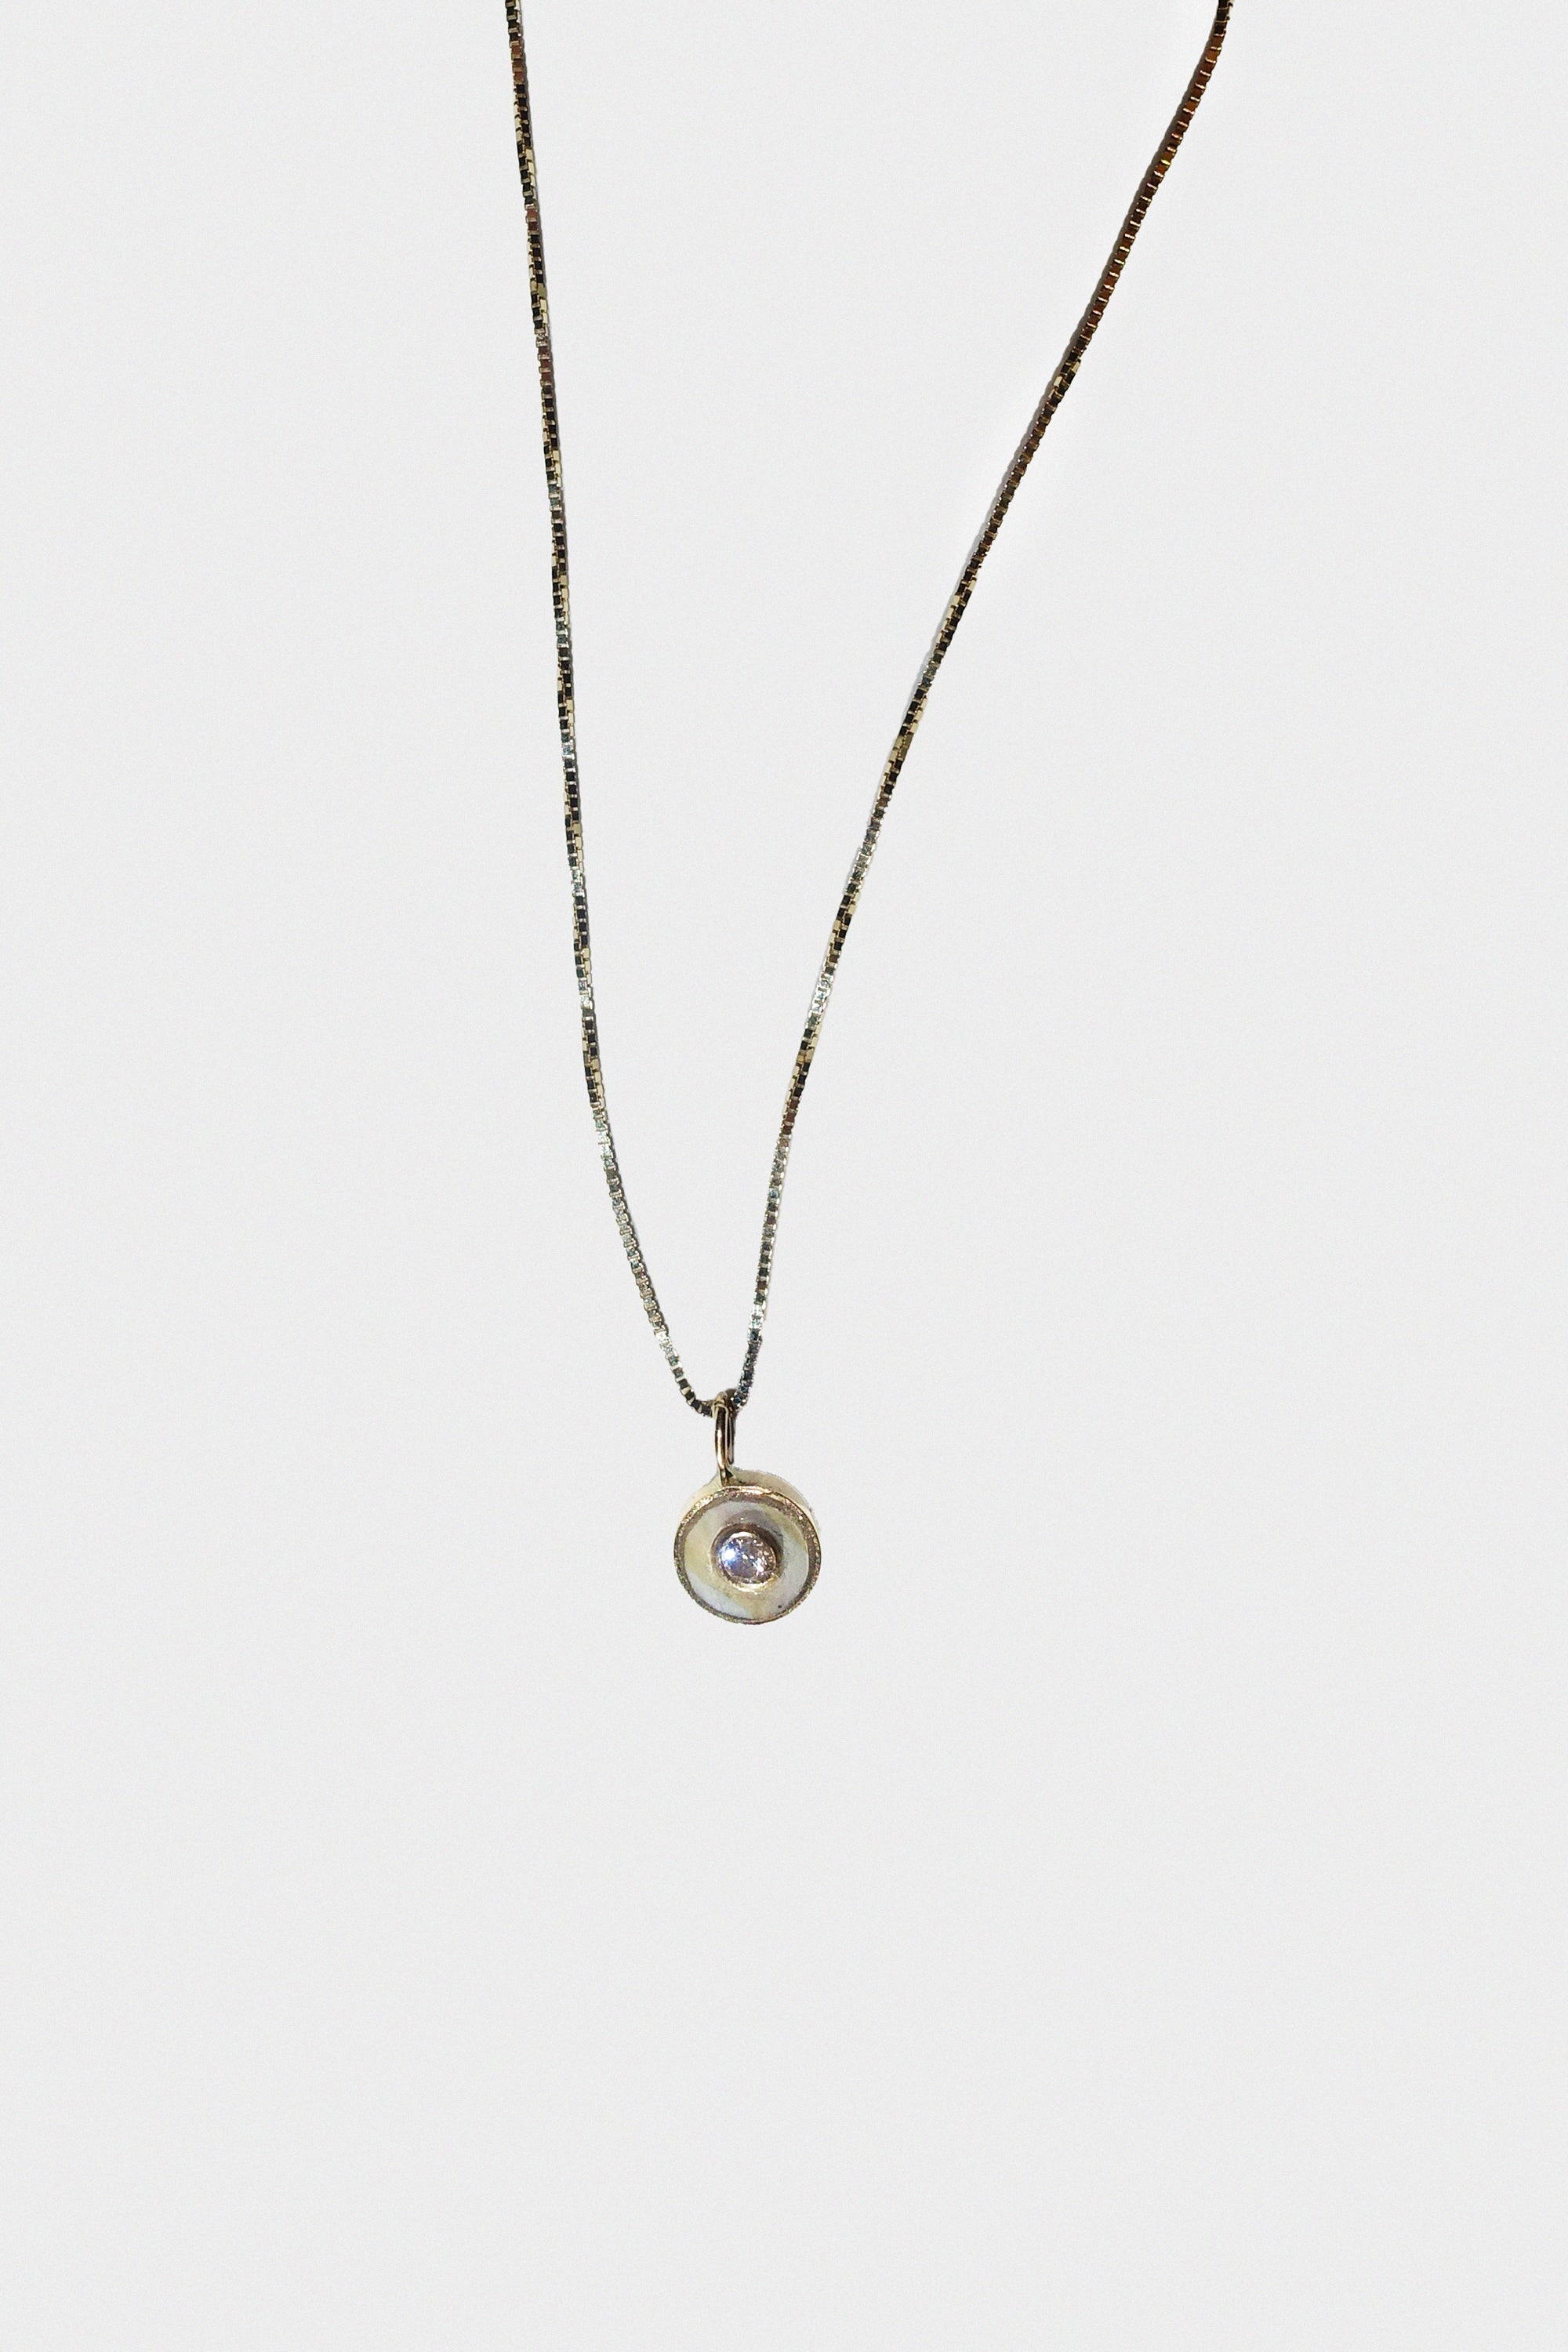 Shobu Necklace in 14k Yellow Gold & Mother of Pearl